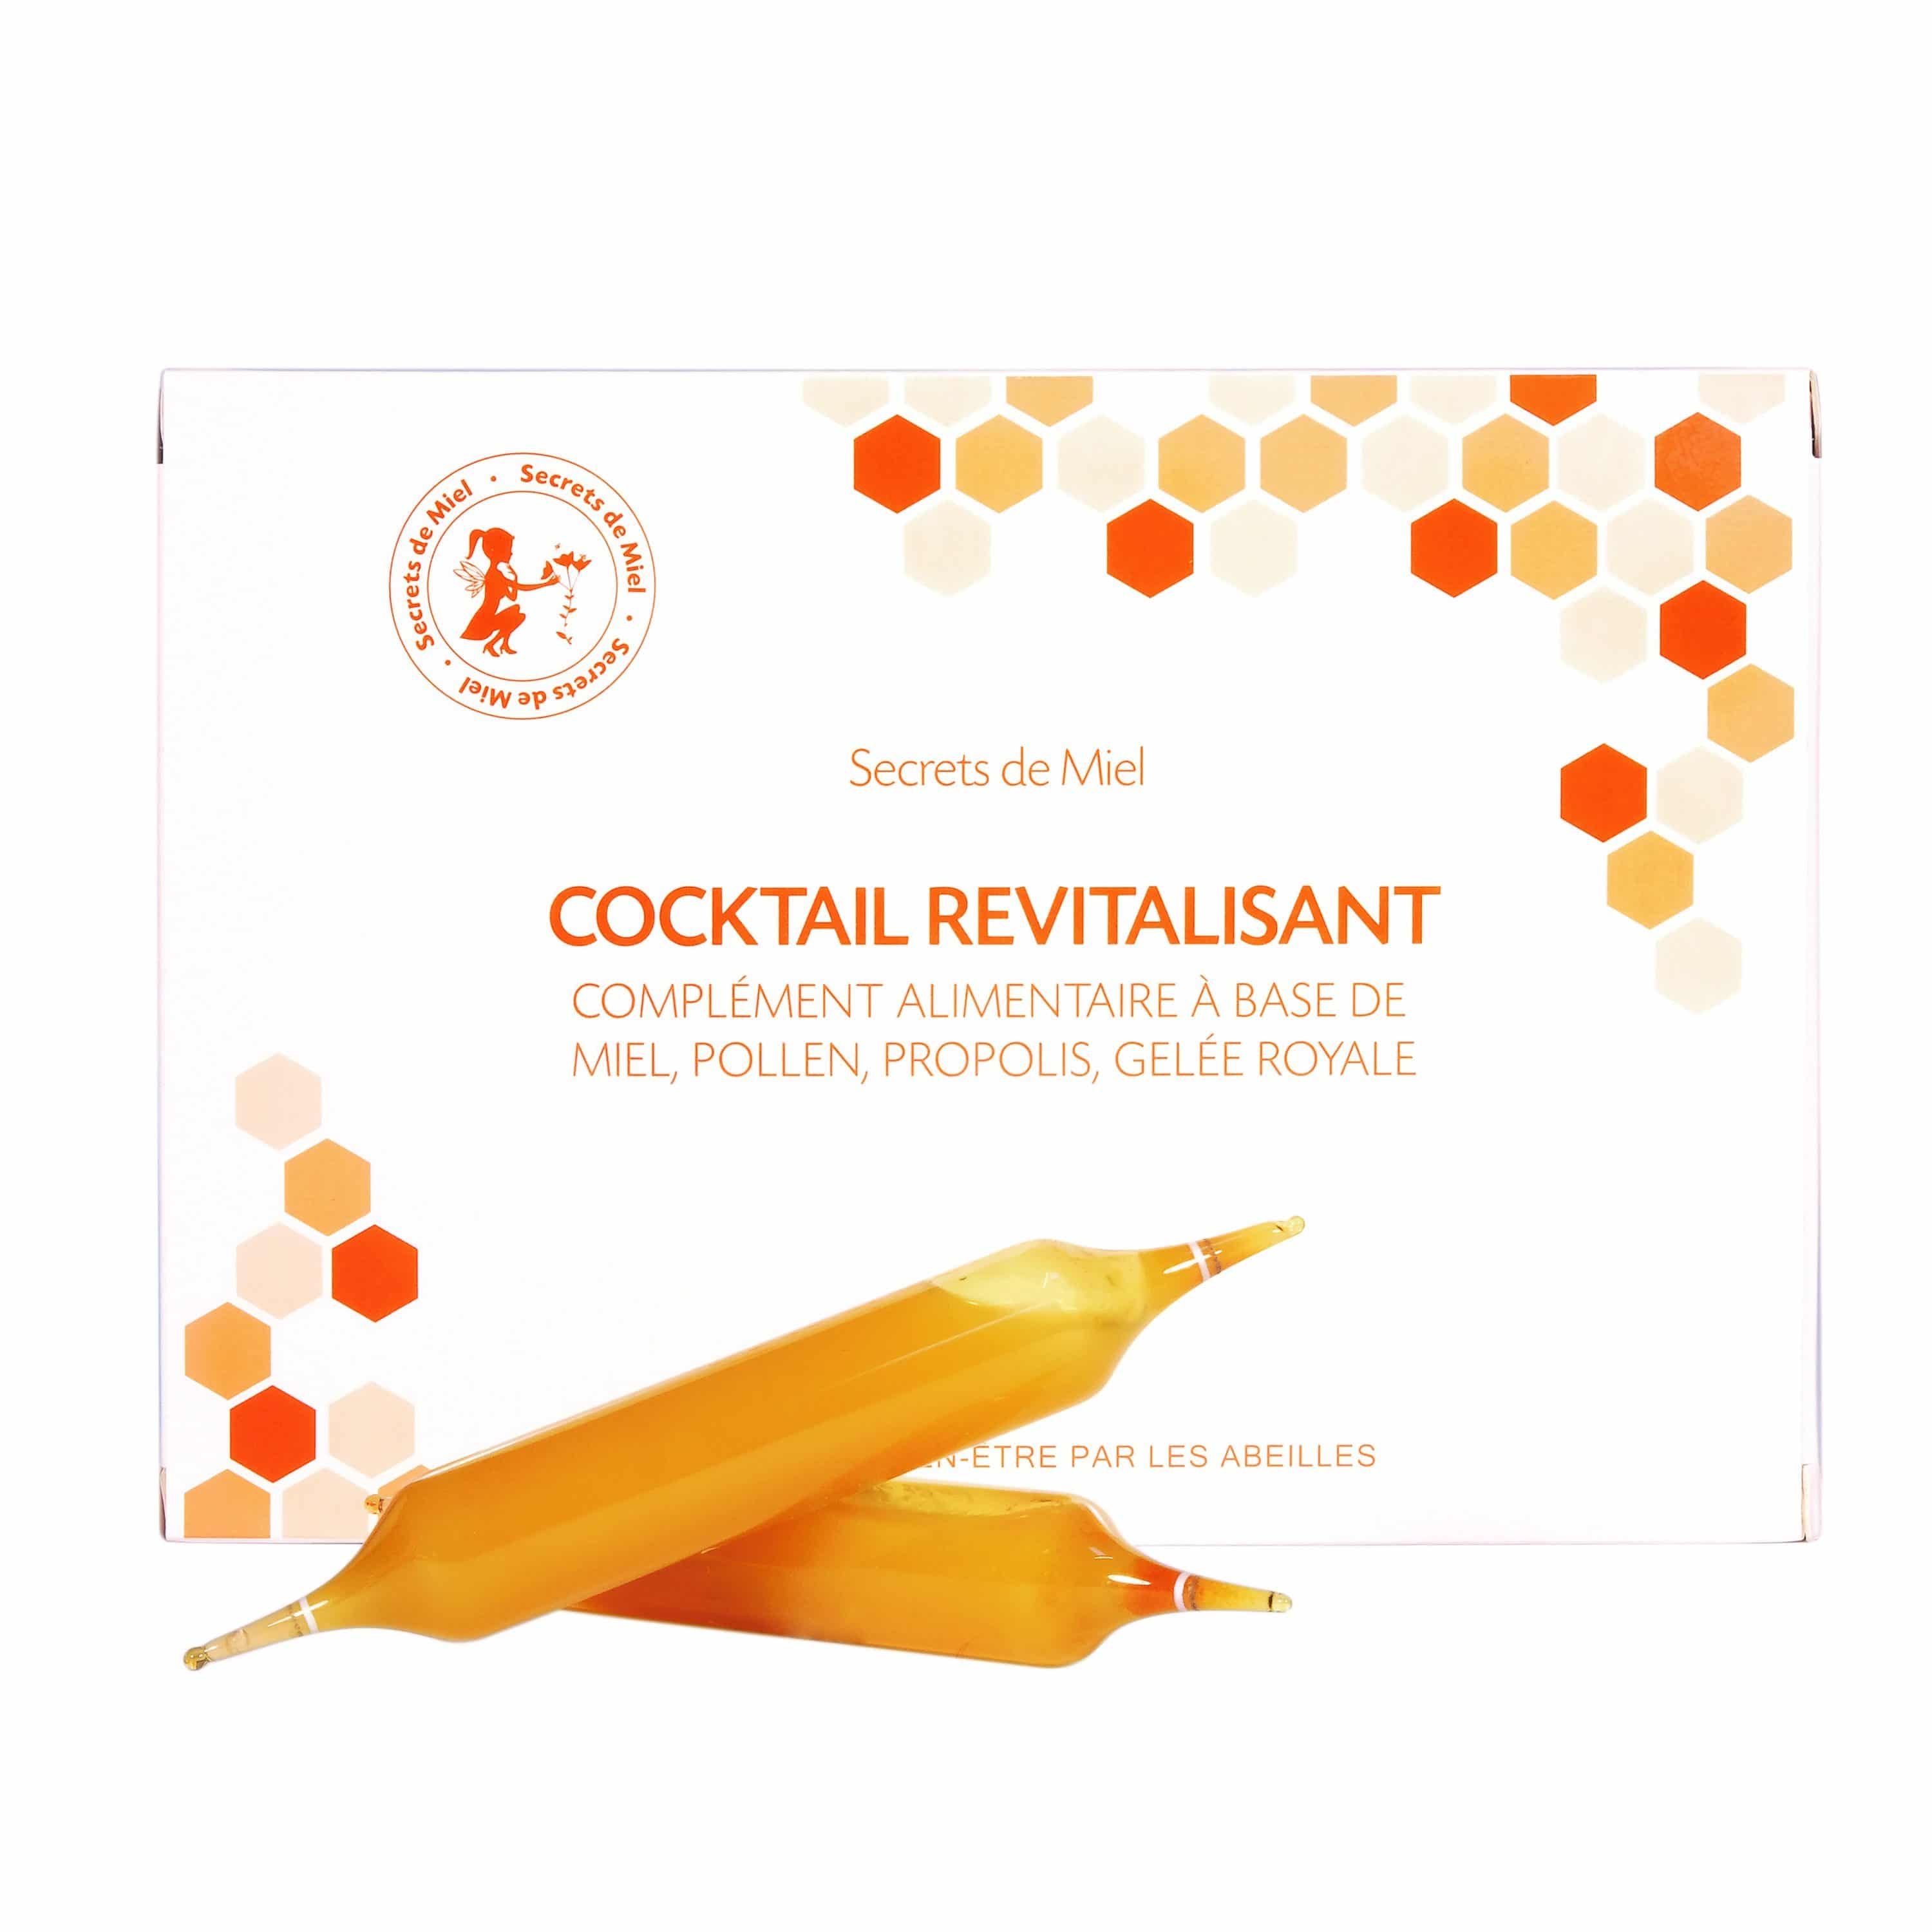 Cocktail revitalisant carre blanc scaled